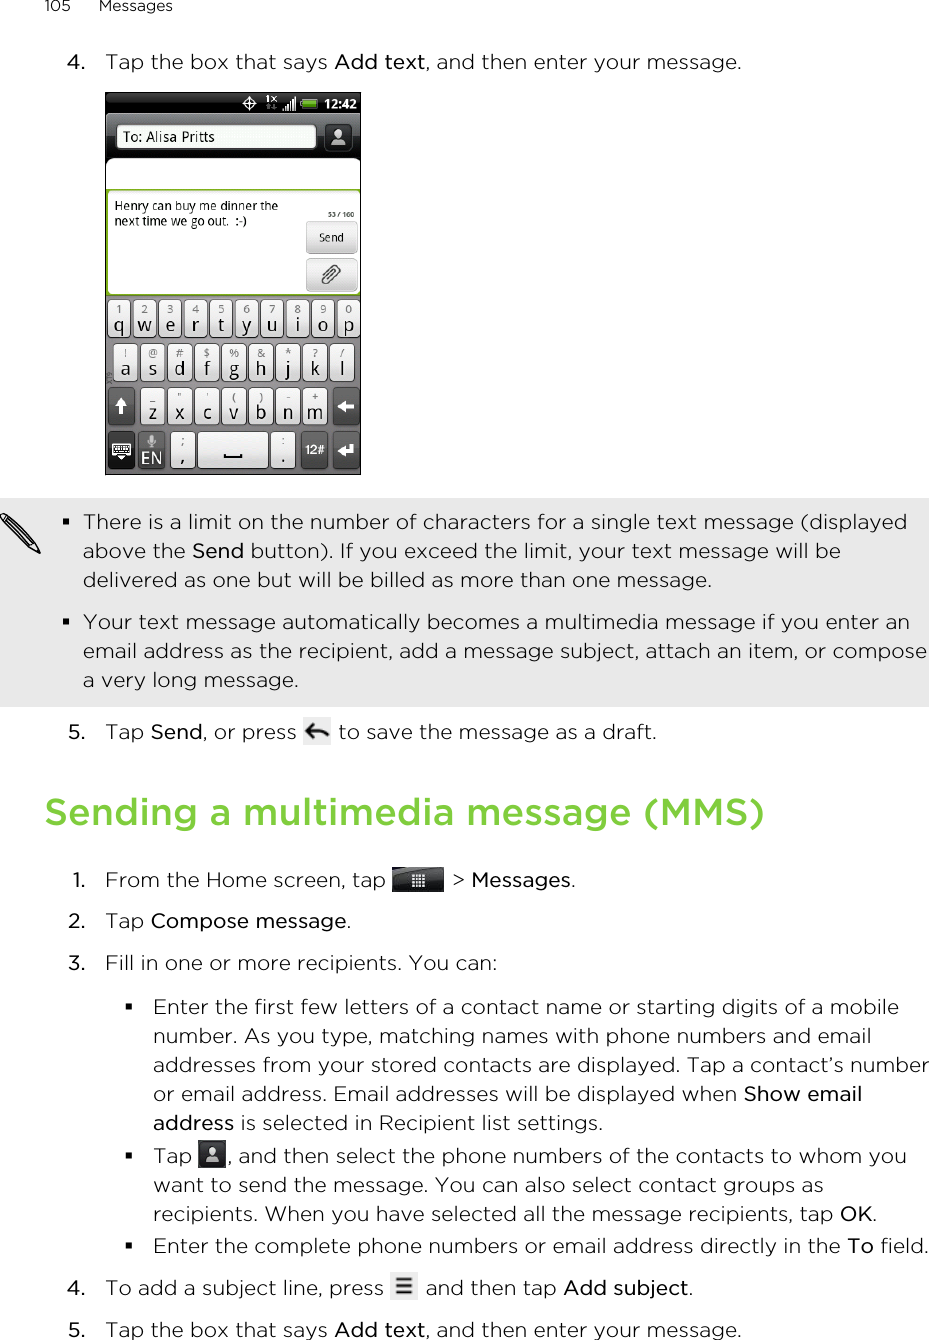 4. Tap the box that says Add text, and then enter your message. §There is a limit on the number of characters for a single text message (displayedabove the Send button). If you exceed the limit, your text message will bedelivered as one but will be billed as more than one message.§Your text message automatically becomes a multimedia message if you enter anemail address as the recipient, add a message subject, attach an item, or composea very long message.5. Tap Send, or press   to save the message as a draft.Sending a multimedia message (MMS)1. From the Home screen, tap   &gt; Messages.2. Tap Compose message.3. Fill in one or more recipients. You can:§Enter the first few letters of a contact name or starting digits of a mobilenumber. As you type, matching names with phone numbers and emailaddresses from your stored contacts are displayed. Tap a contact’s numberor email address. Email addresses will be displayed when Show emailaddress is selected in Recipient list settings.§Tap  , and then select the phone numbers of the contacts to whom youwant to send the message. You can also select contact groups asrecipients. When you have selected all the message recipients, tap OK.§Enter the complete phone numbers or email address directly in the To field.4. To add a subject line, press   and then tap Add subject.5. Tap the box that says Add text, and then enter your message.105 Messages